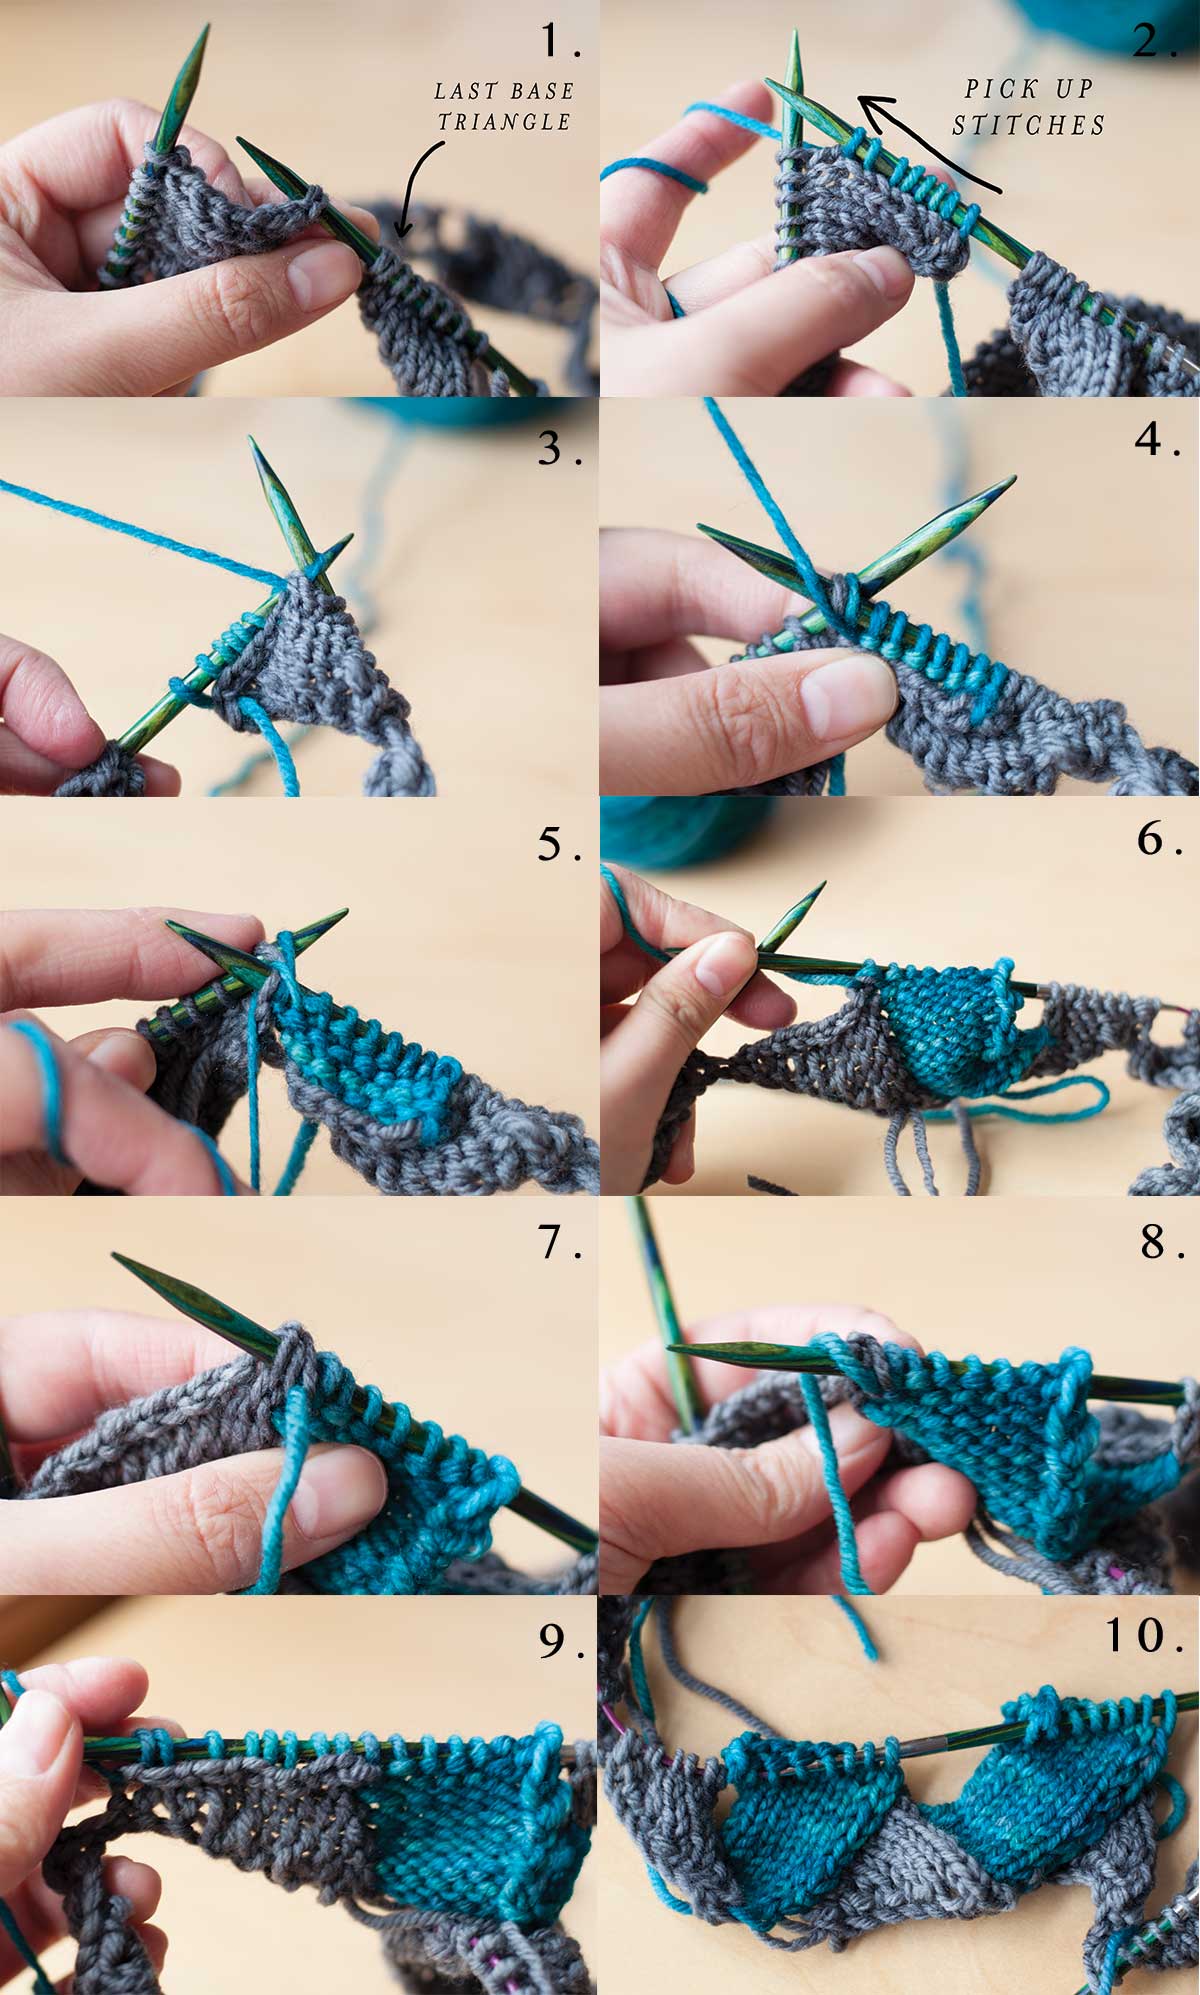 How to knit right-leaning triangles